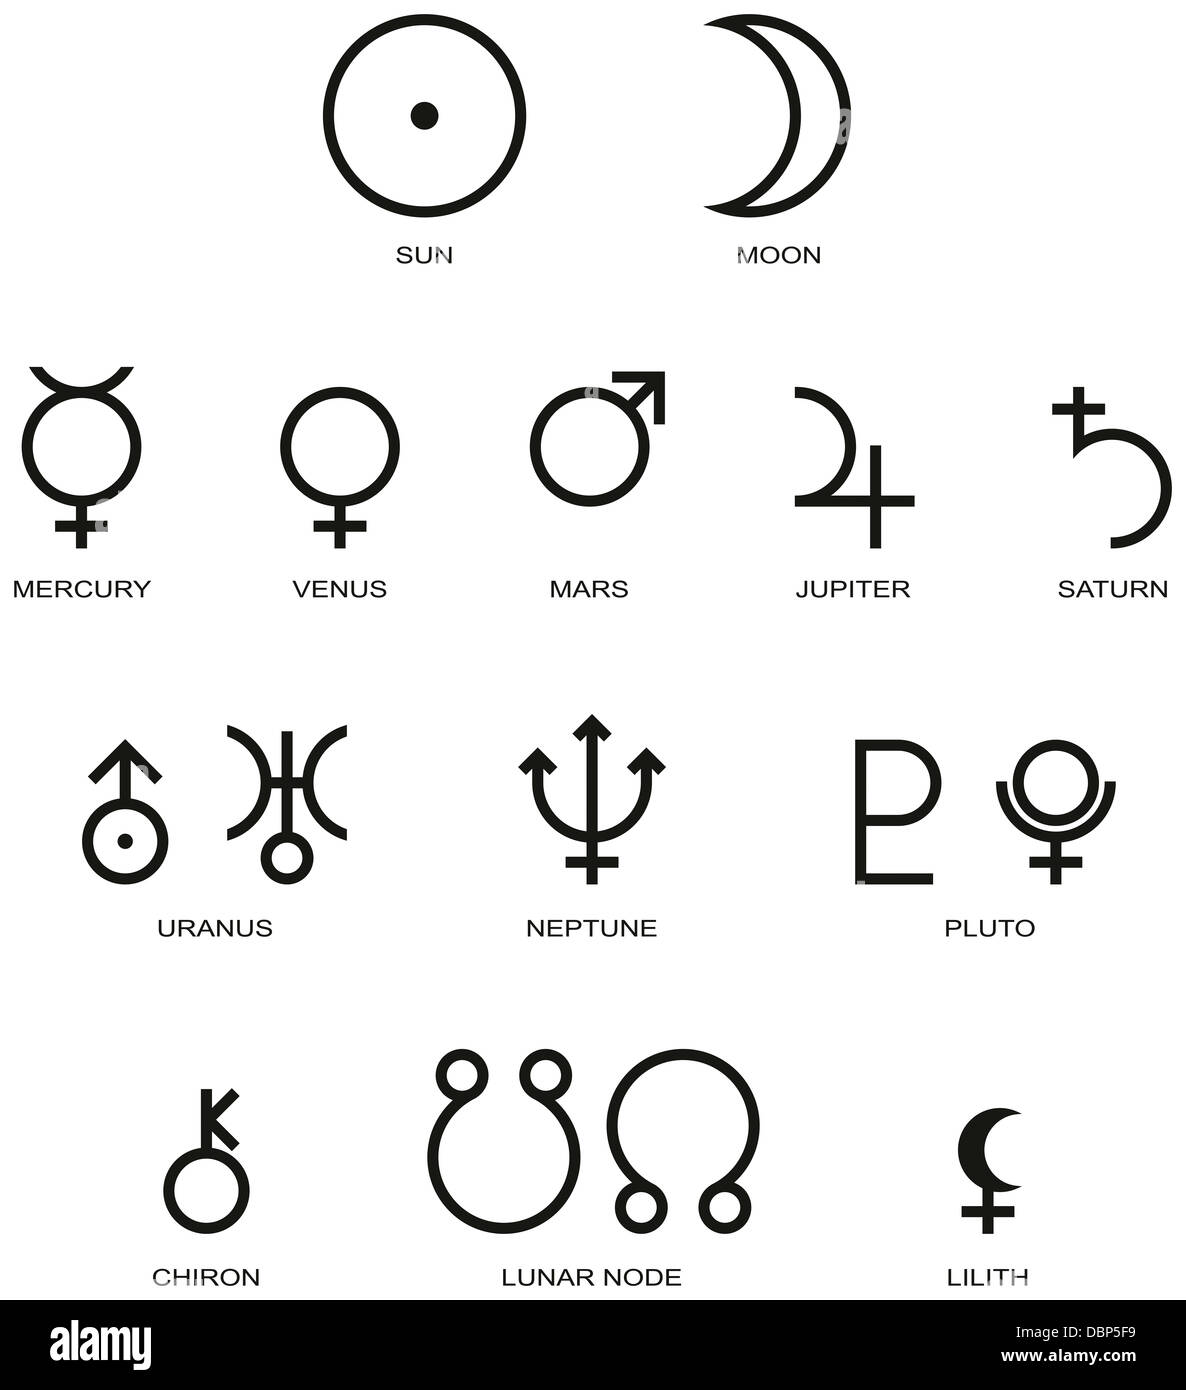 astrology planet symbols meanings